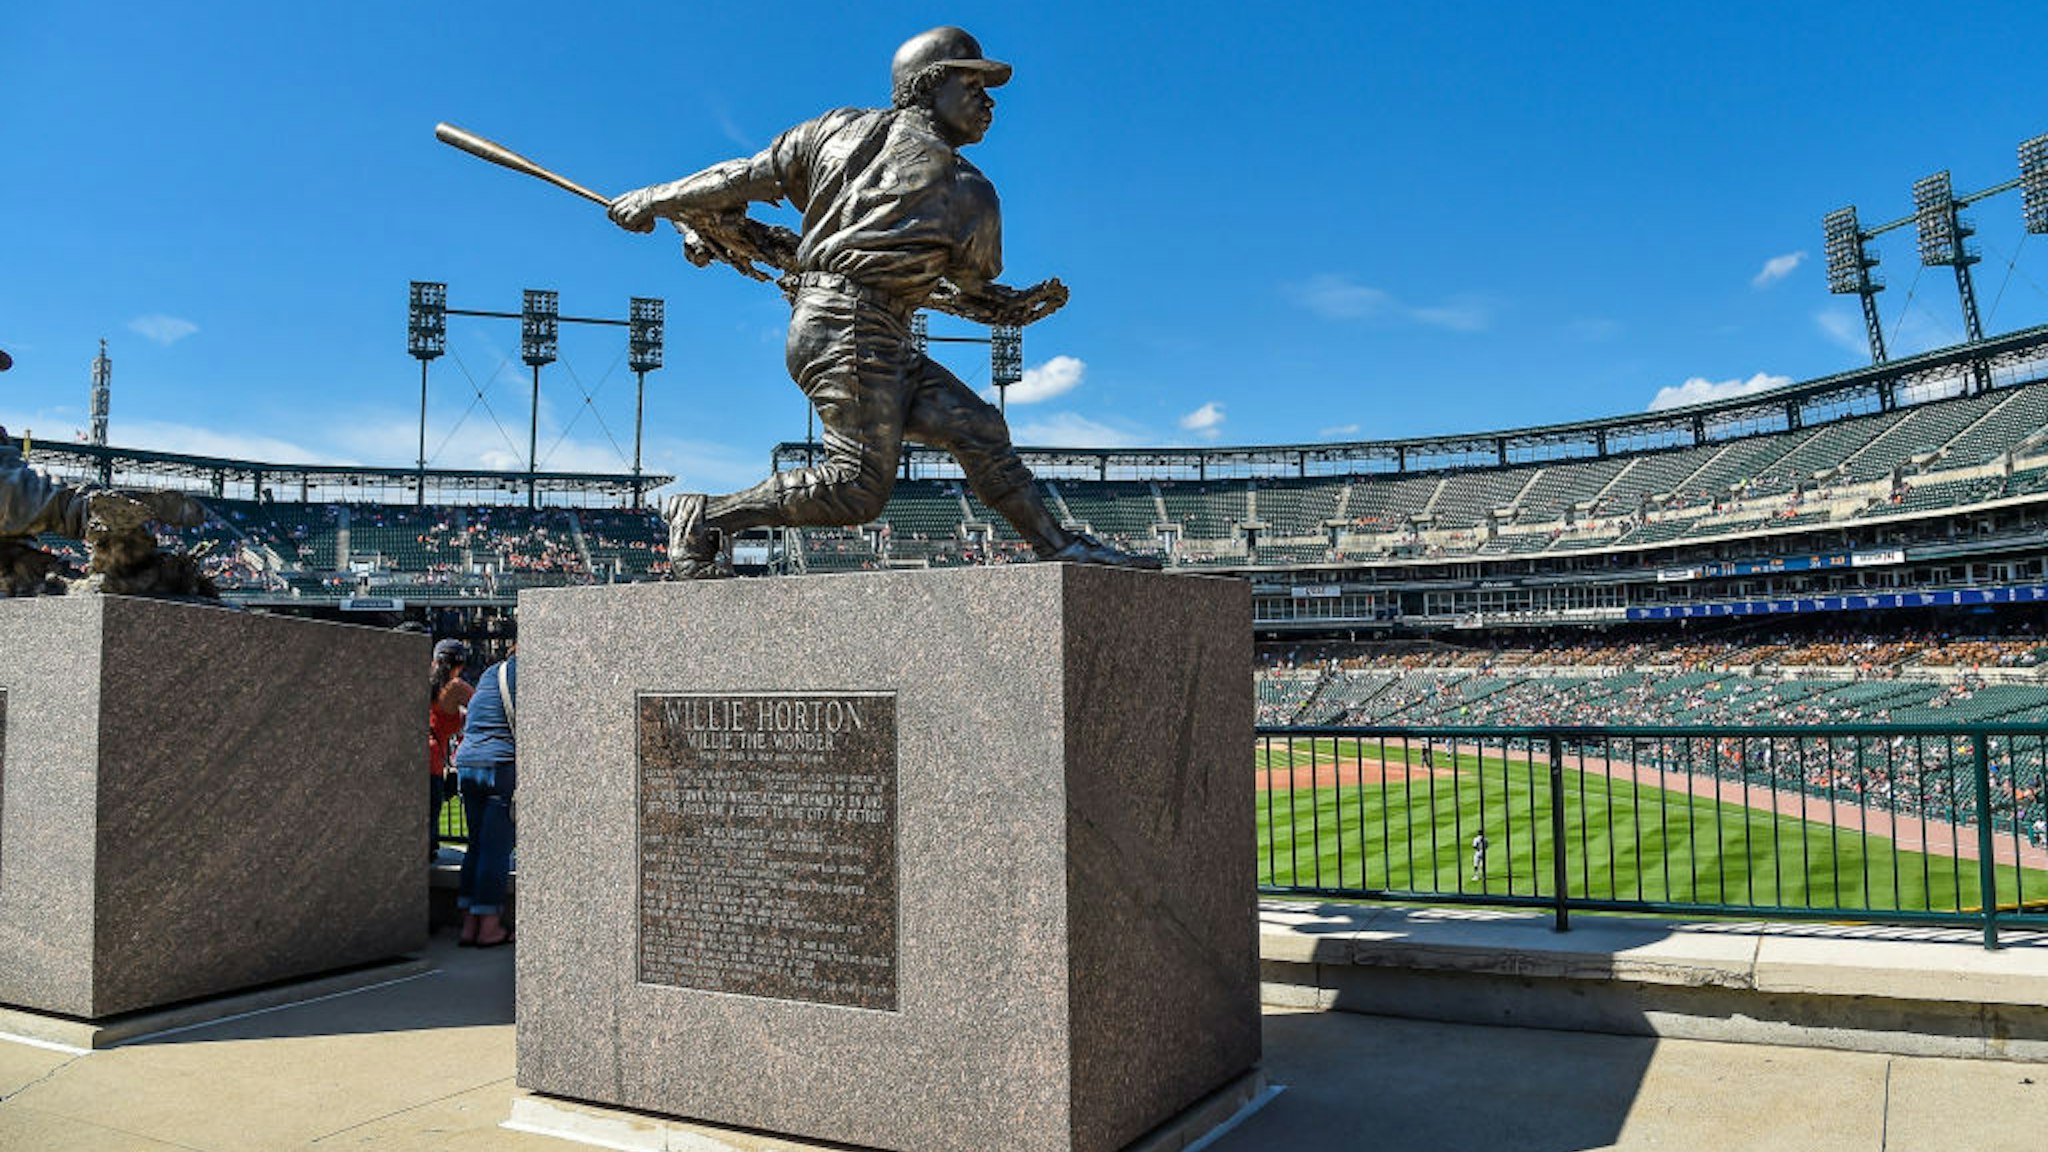 DETROIT, MI - SEPTEMBER 22: The statue honoring former Detroit Tigers great Willie Horton during the Detroit Tigers versus Chicago White Sox game on Sunday September 22, 2019 at Comerica Park in Detroit, MI. (Photo by Steven King/Icon Sportswire via Getty Images)